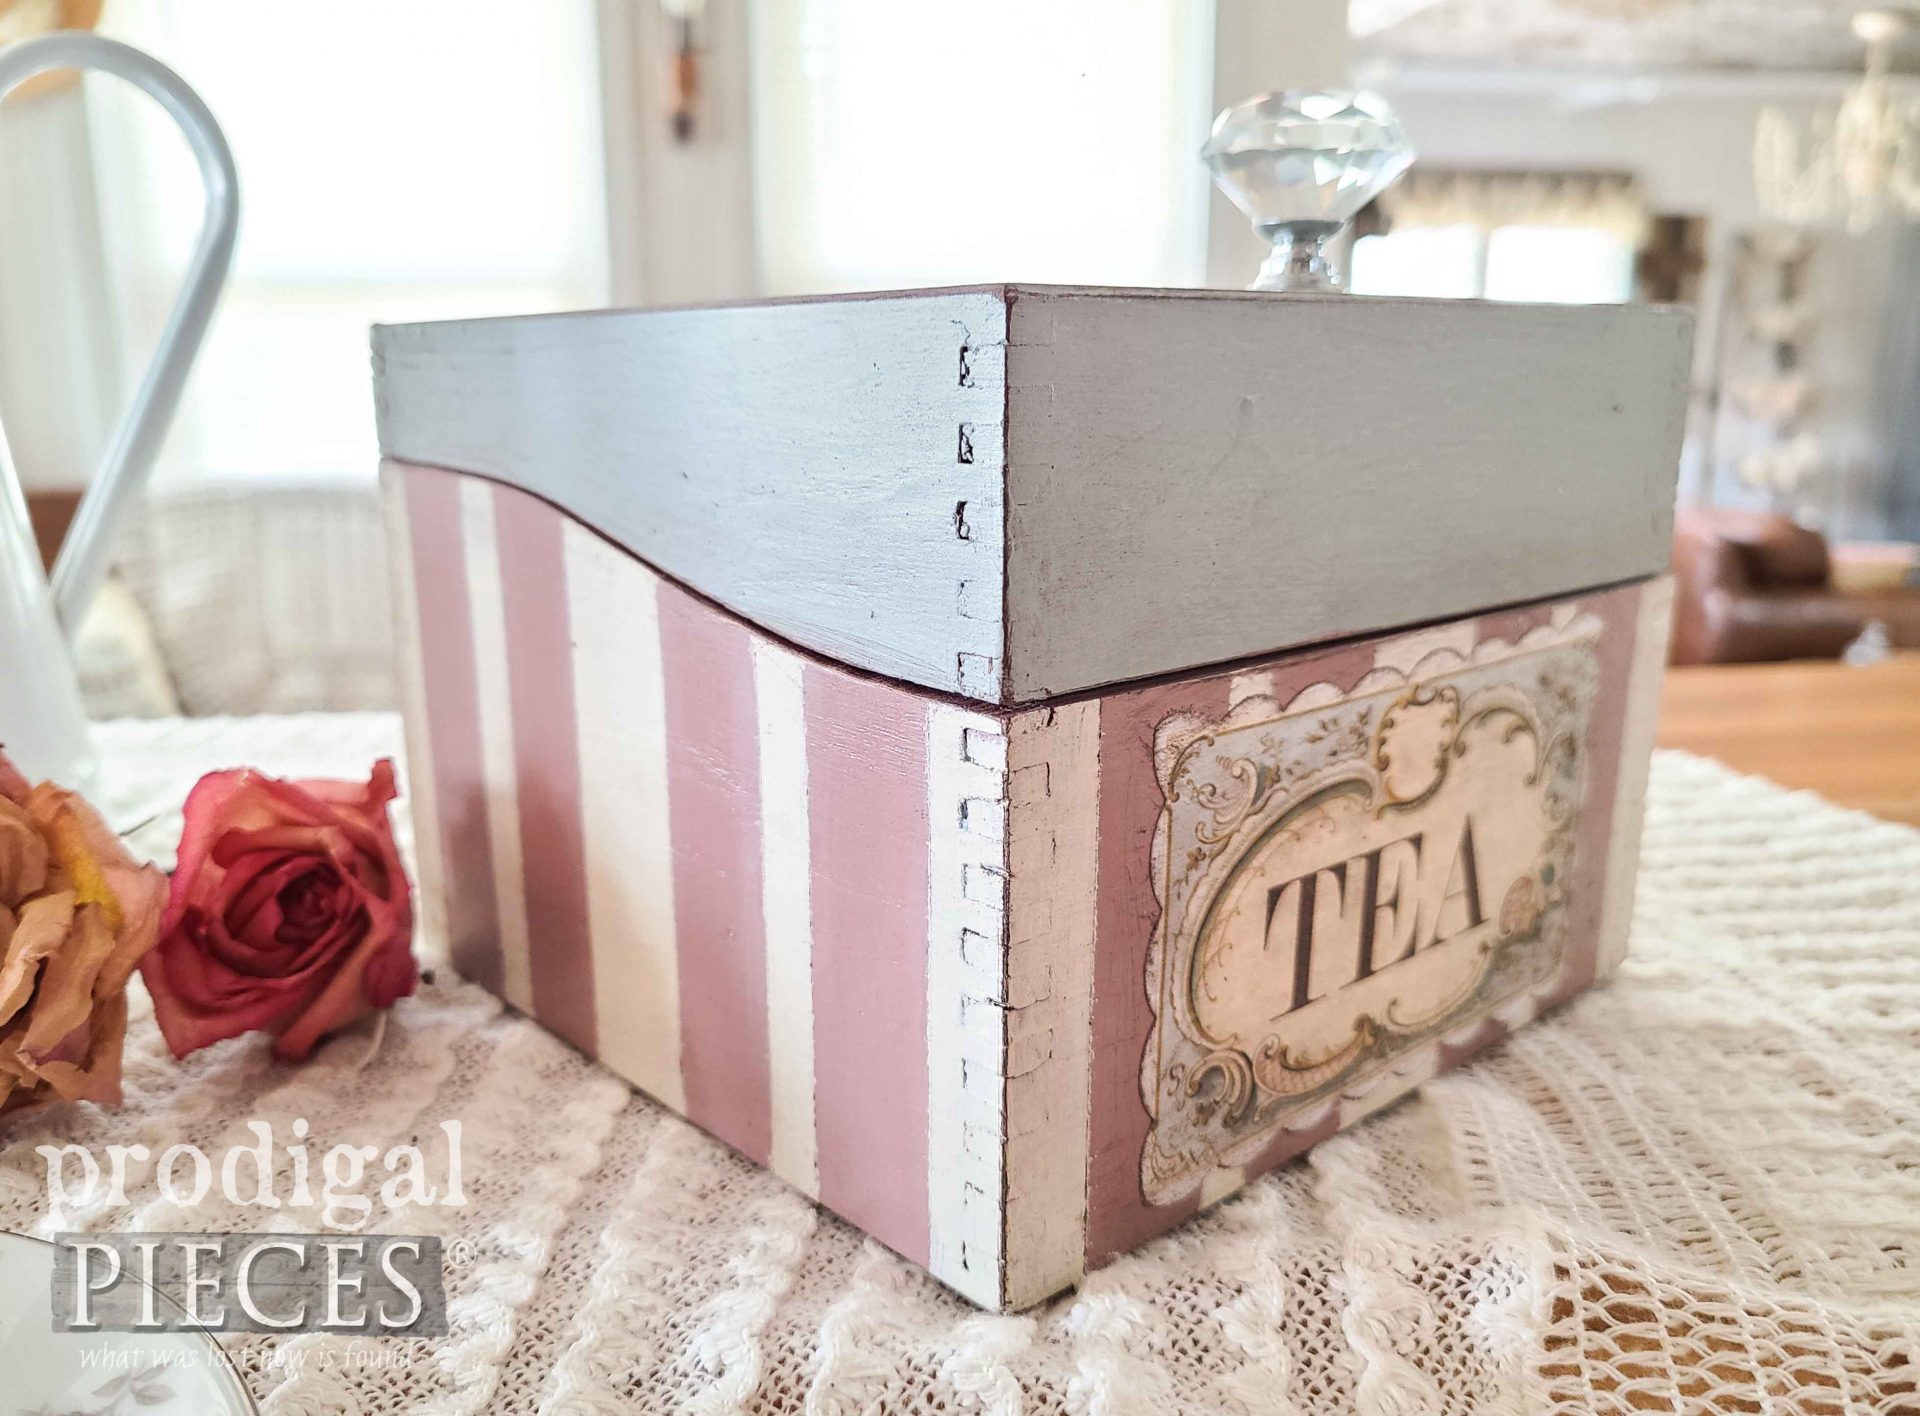 Striped Box for Tea by Larissa of Prodigal Pieces | prodigalpieces.com #prodigalpieces #vintage #shabbychic #cottage